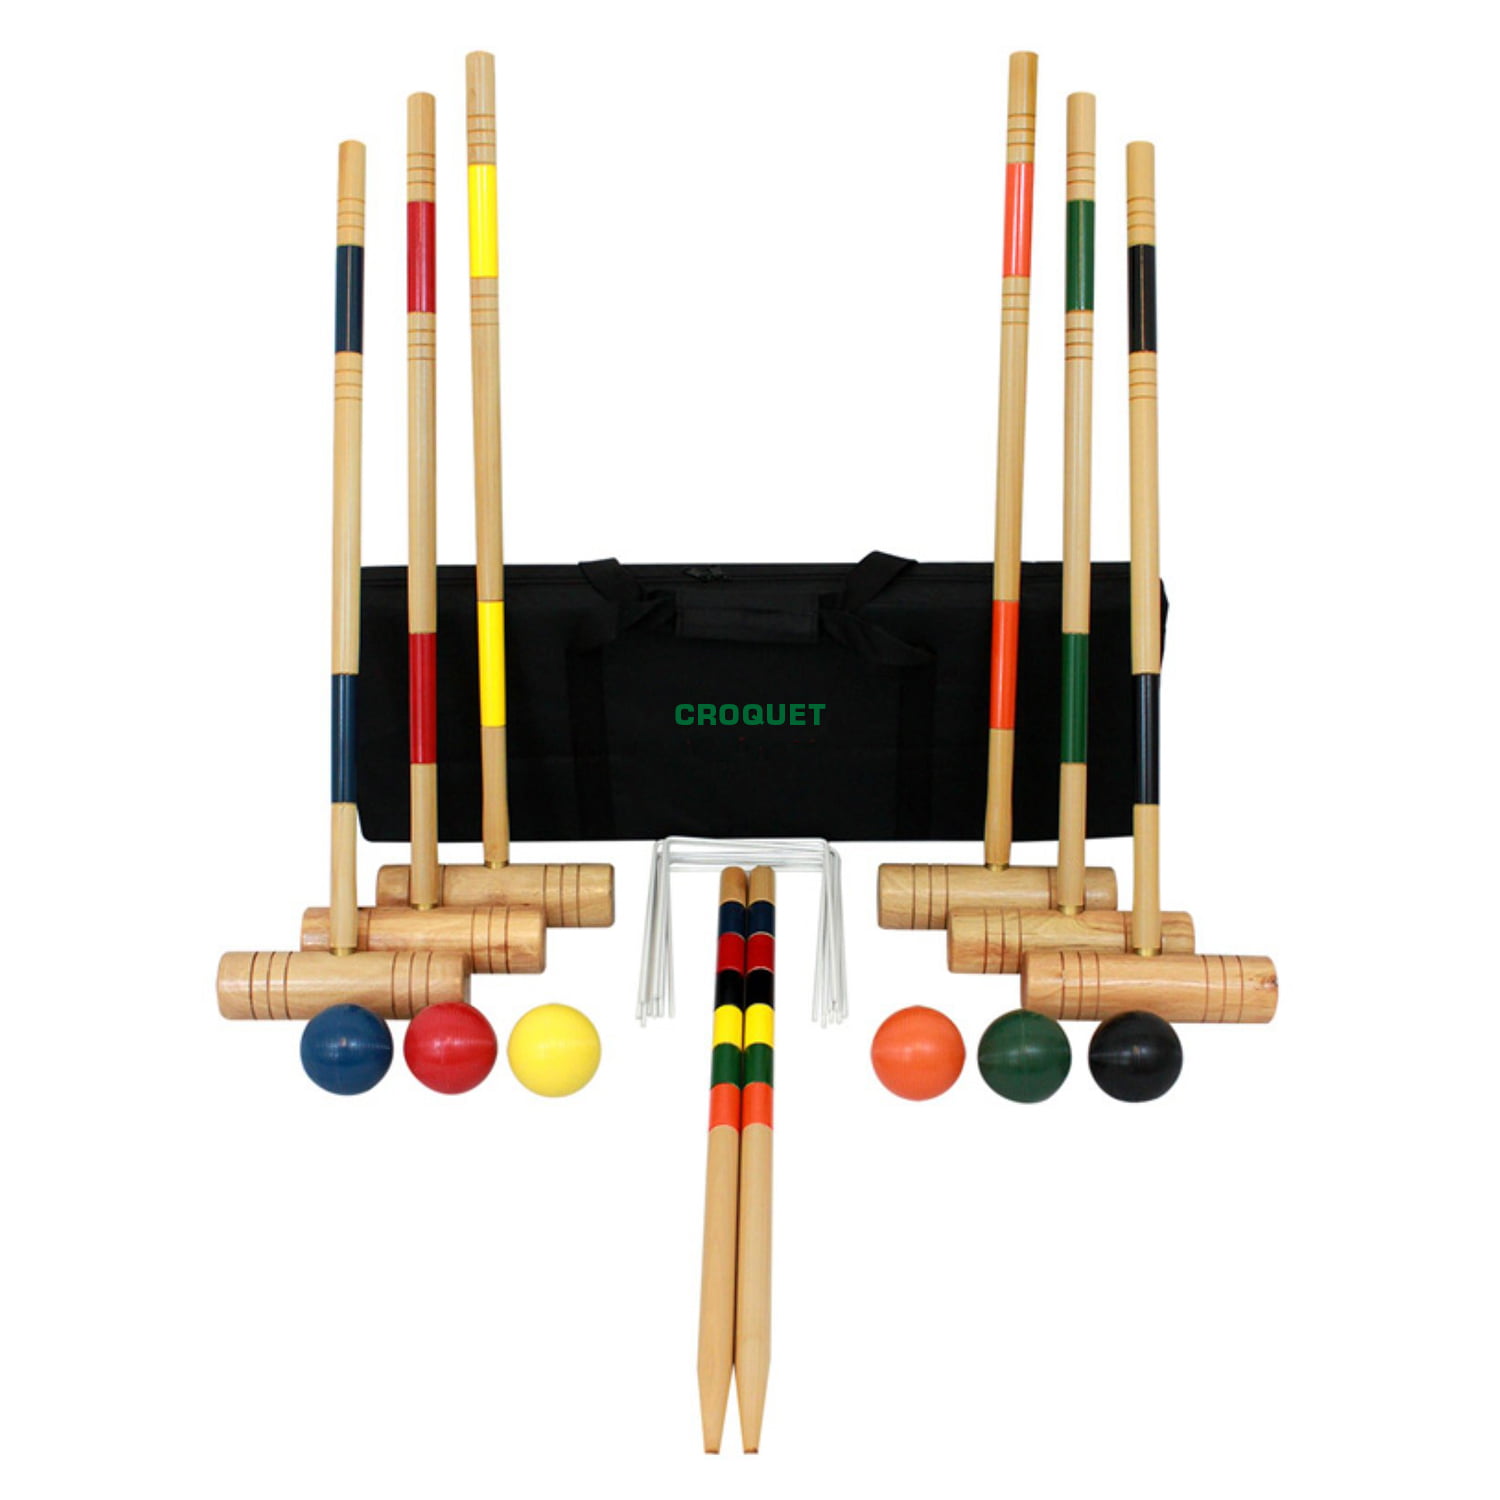 HARDWOOD OUTDOOR CROQUET SET DELUXE SPORTS WITH CARRYING BAG LAWN RECREATION 